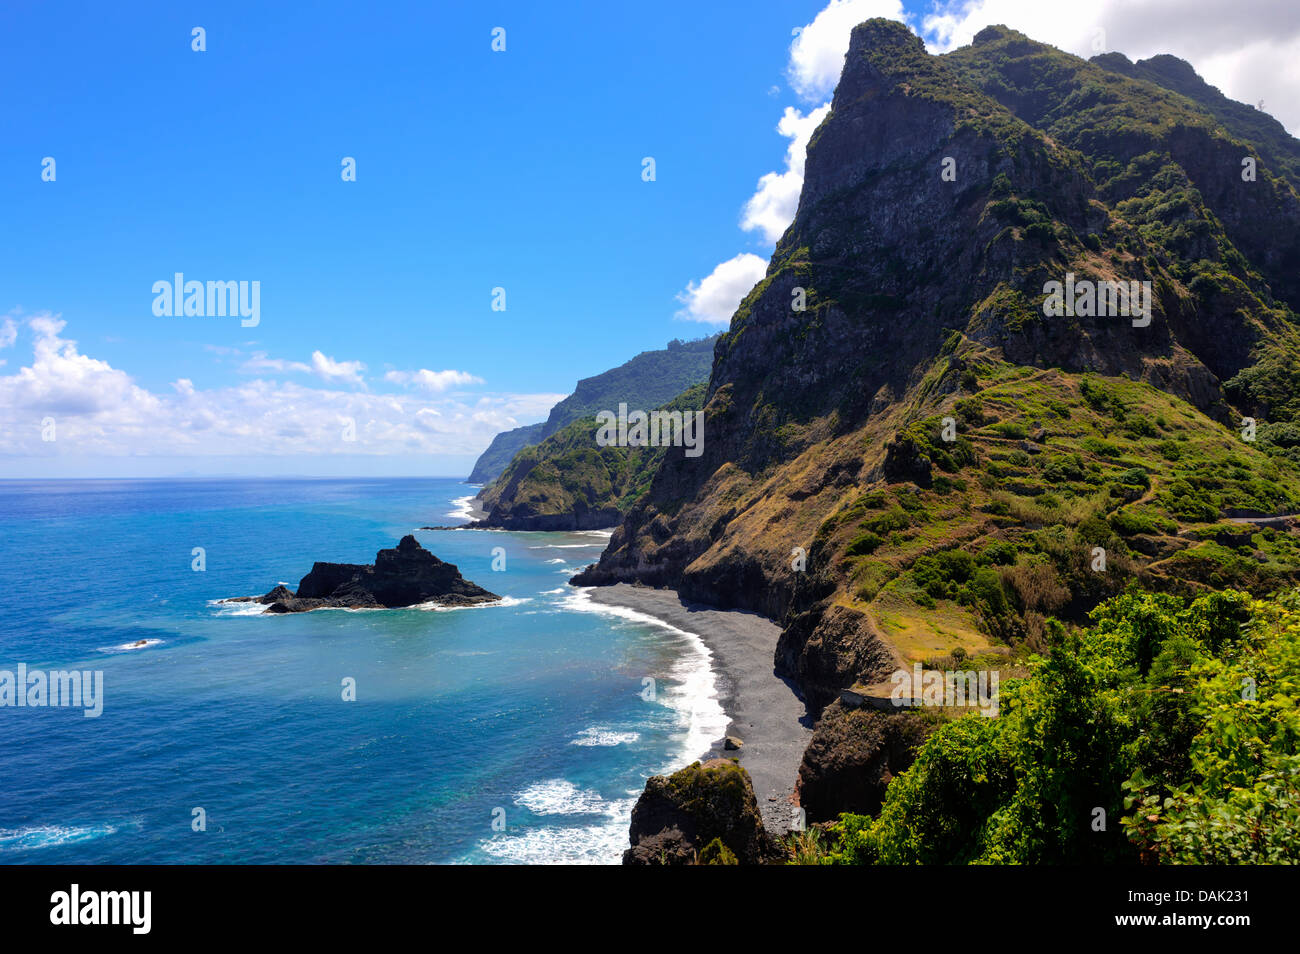 Portugal, Cliffs of Madeira in Boaventura Stock Photo